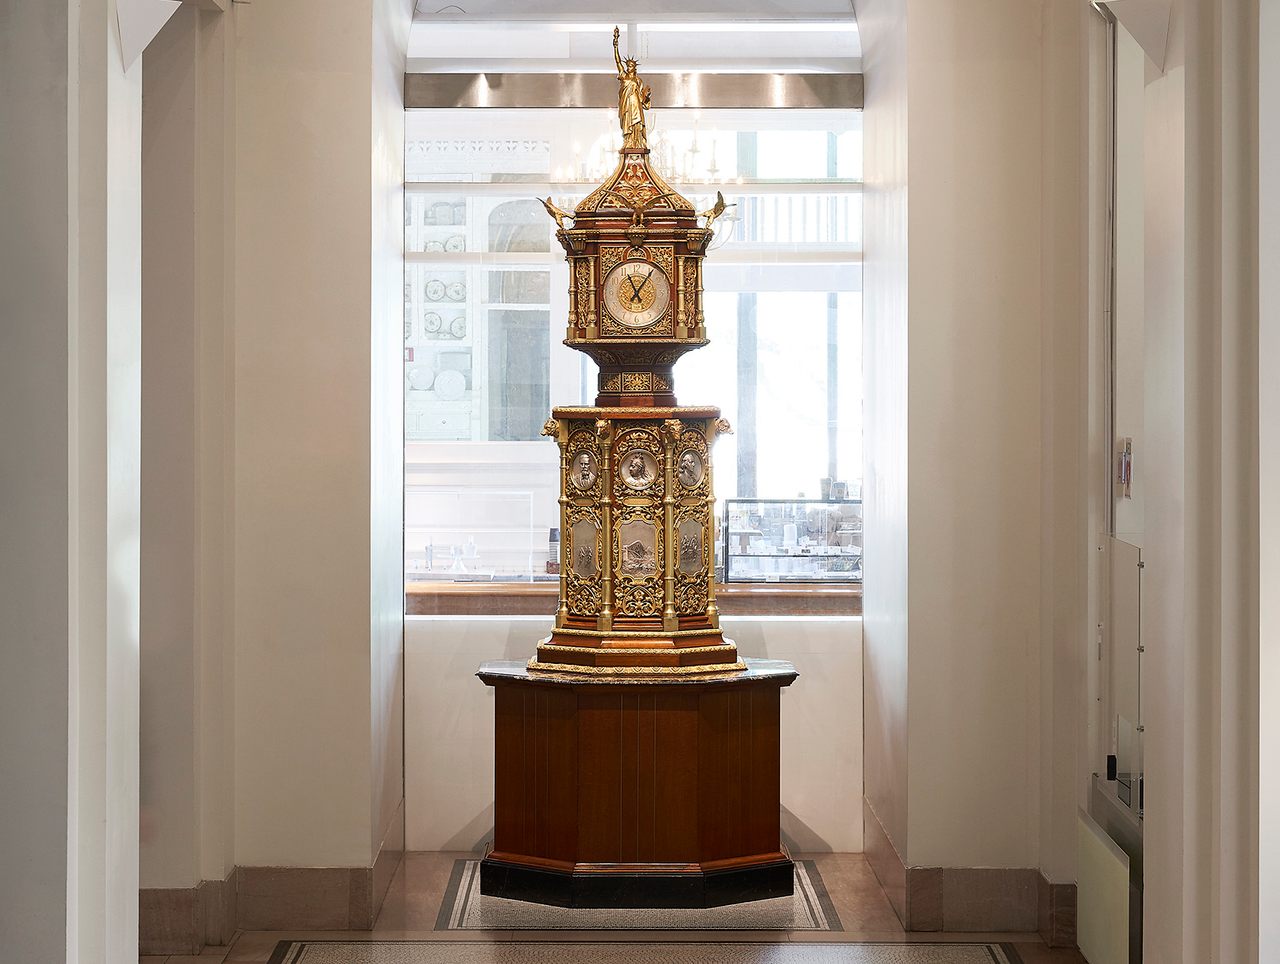 The restored clock is currently on display at the New-York Historical Society. It will reclaim its place in the lobby of the Waldorf Astoria when renovations on the hotel are complete.